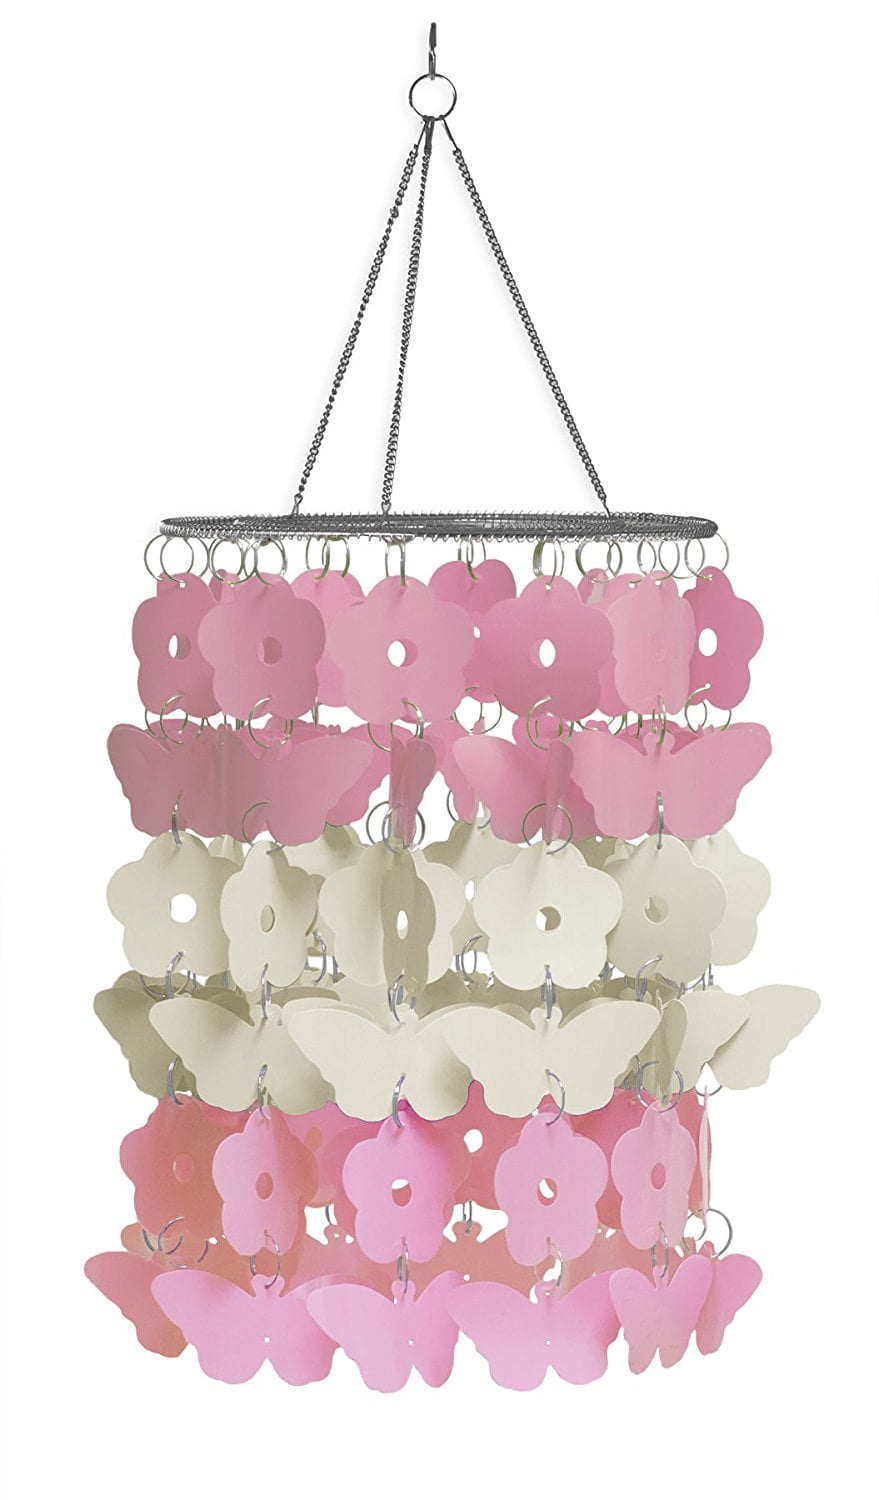 2 Layer WallPops Butterfly Garden Chandelier Ready to Hang 